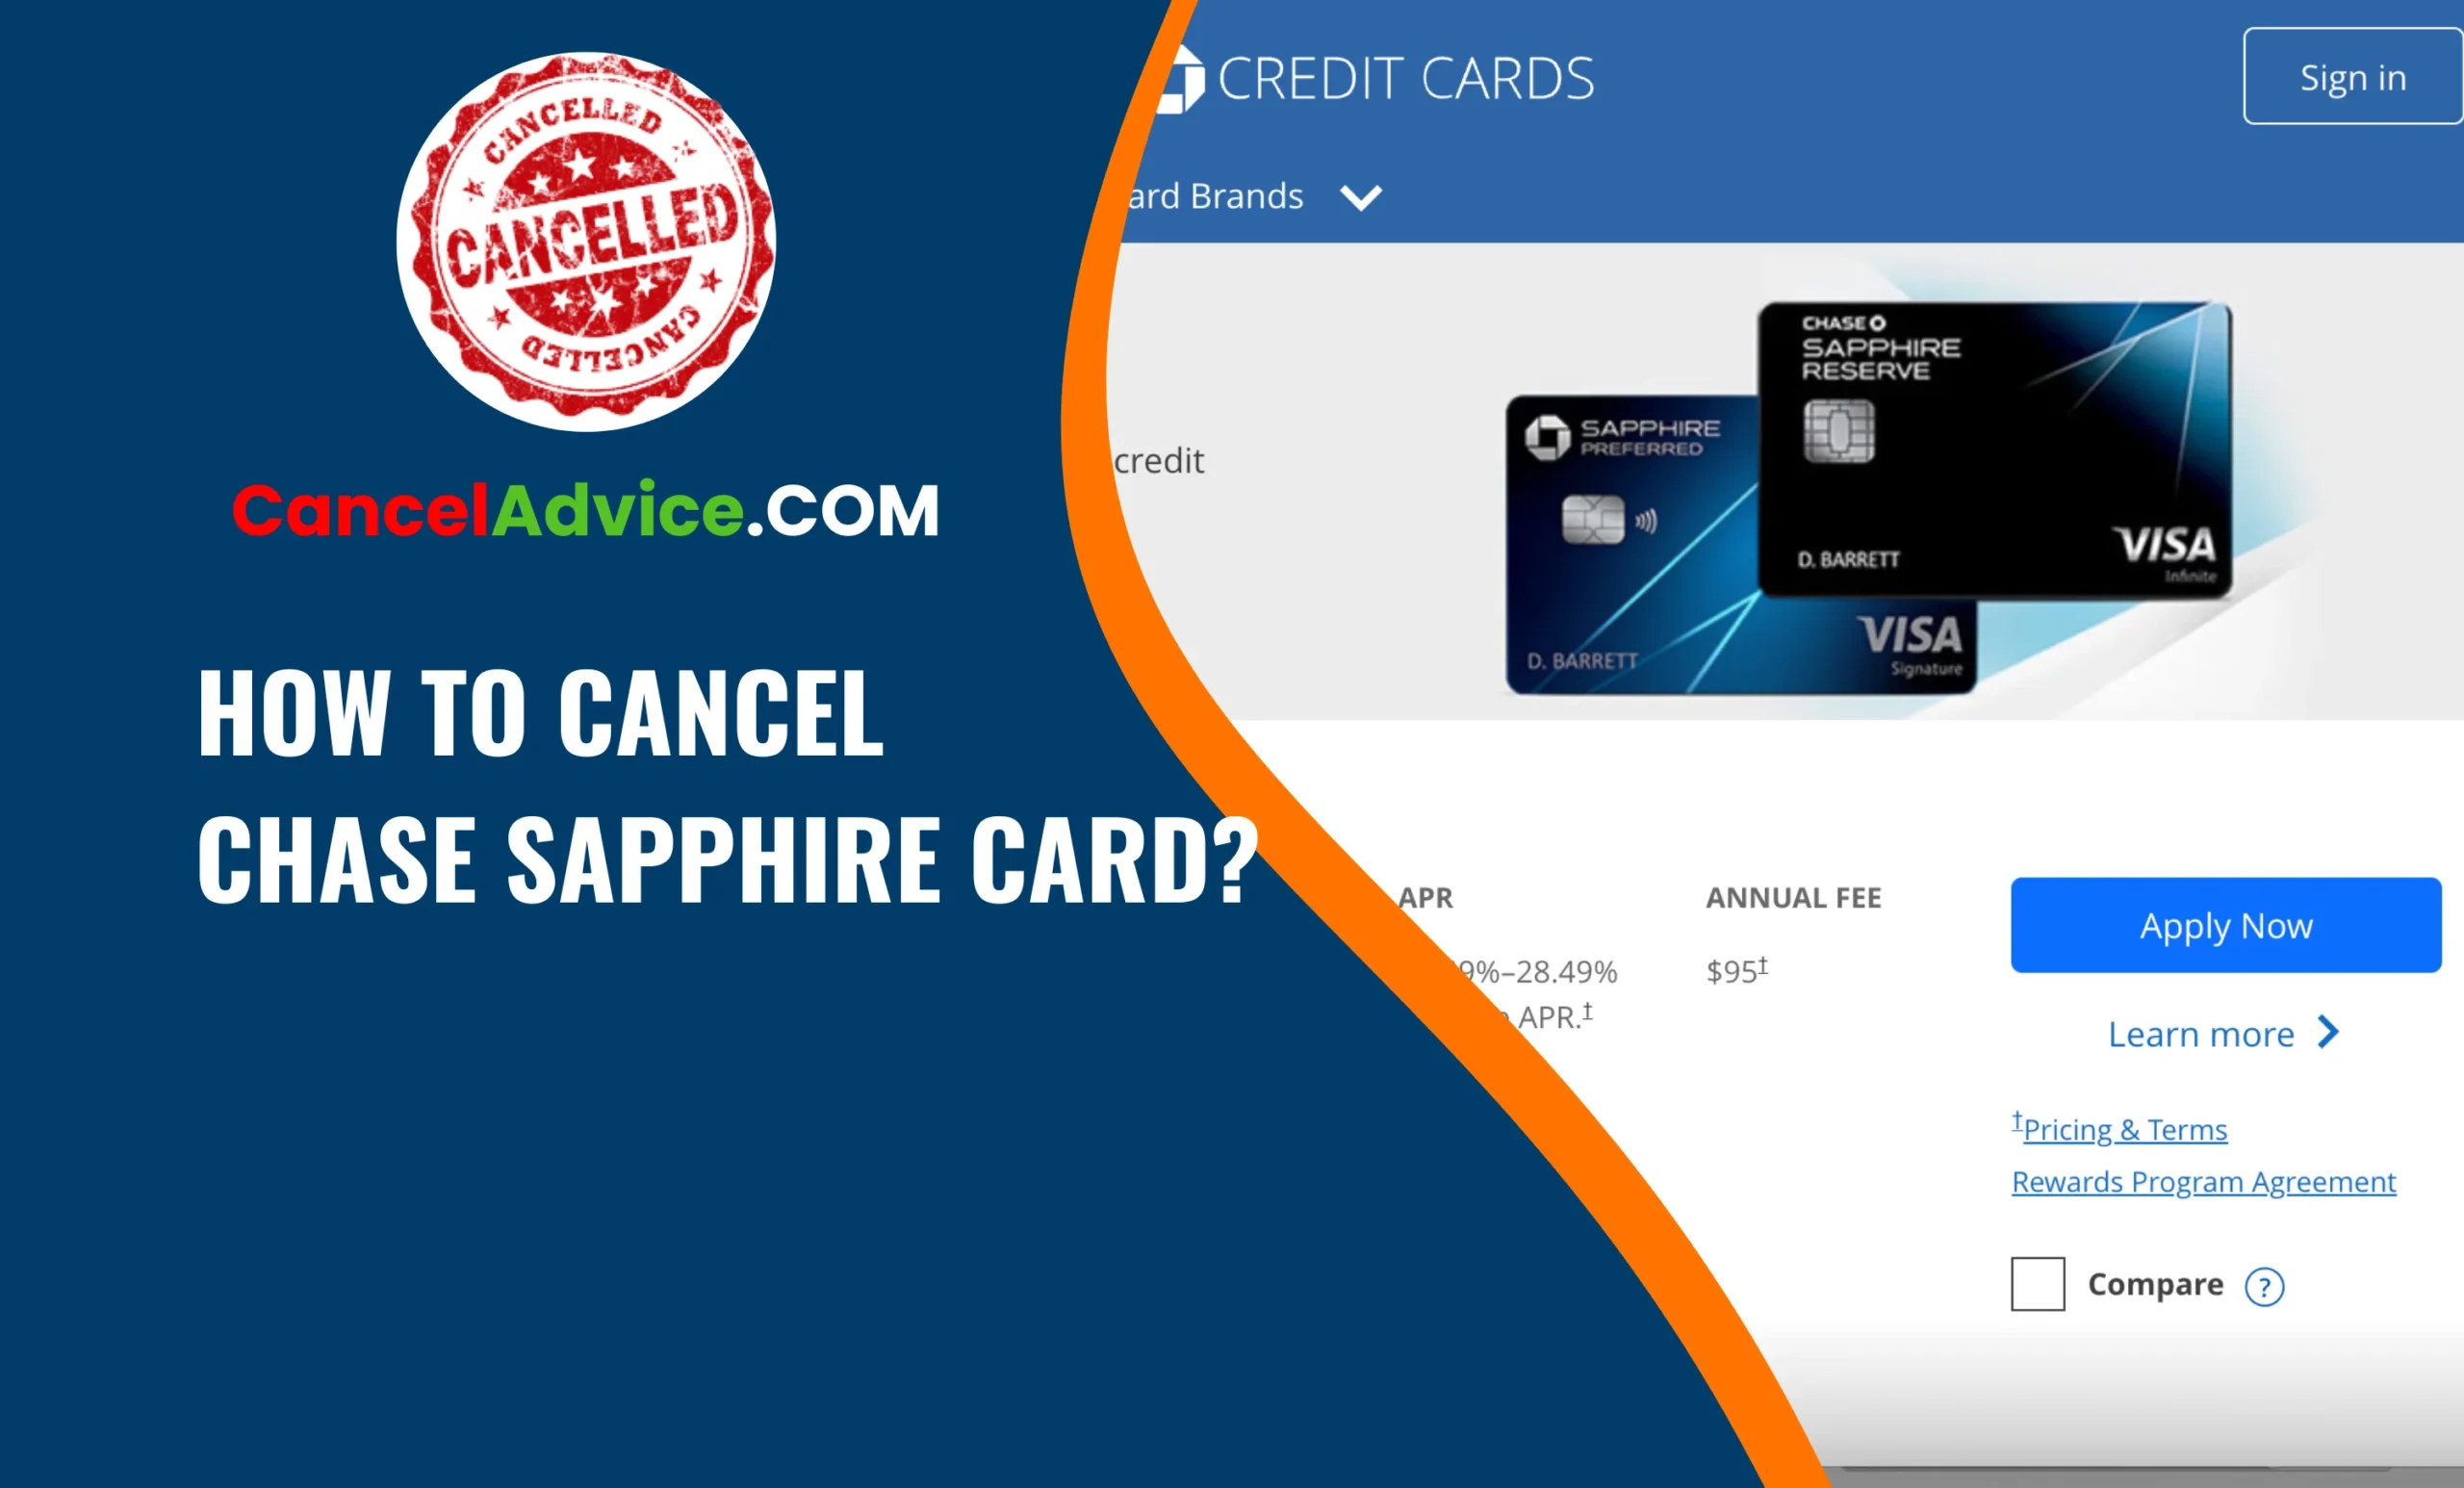 How to Cancel a Chase Sapphire Card